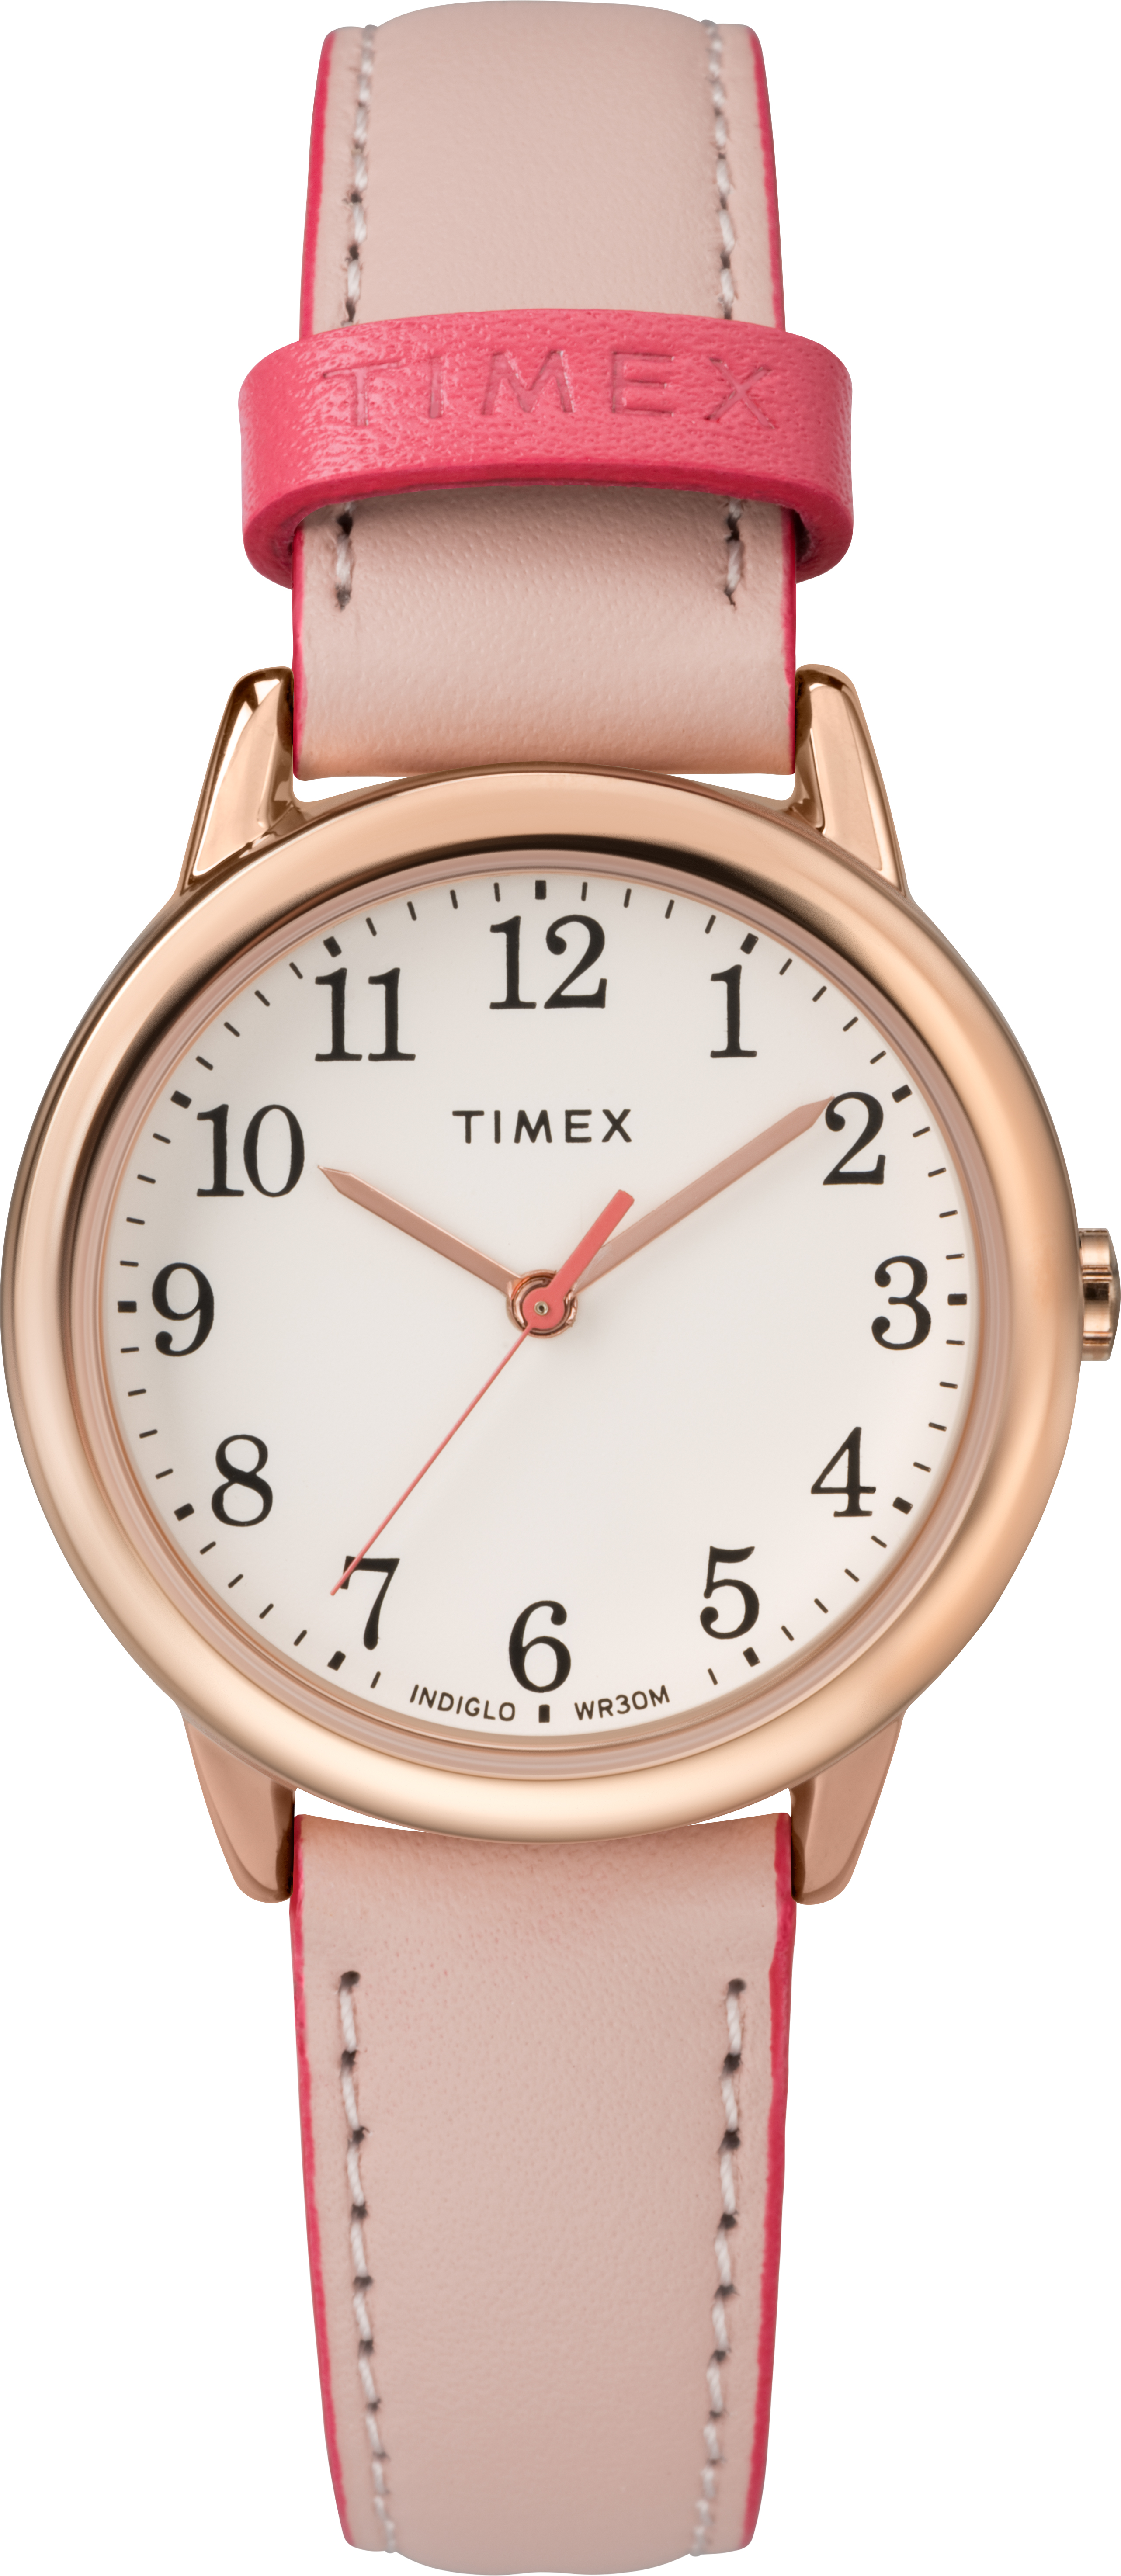 Timex Tw2r62800 Women's 30mm Easy Reader Pink Leather Strap Watch